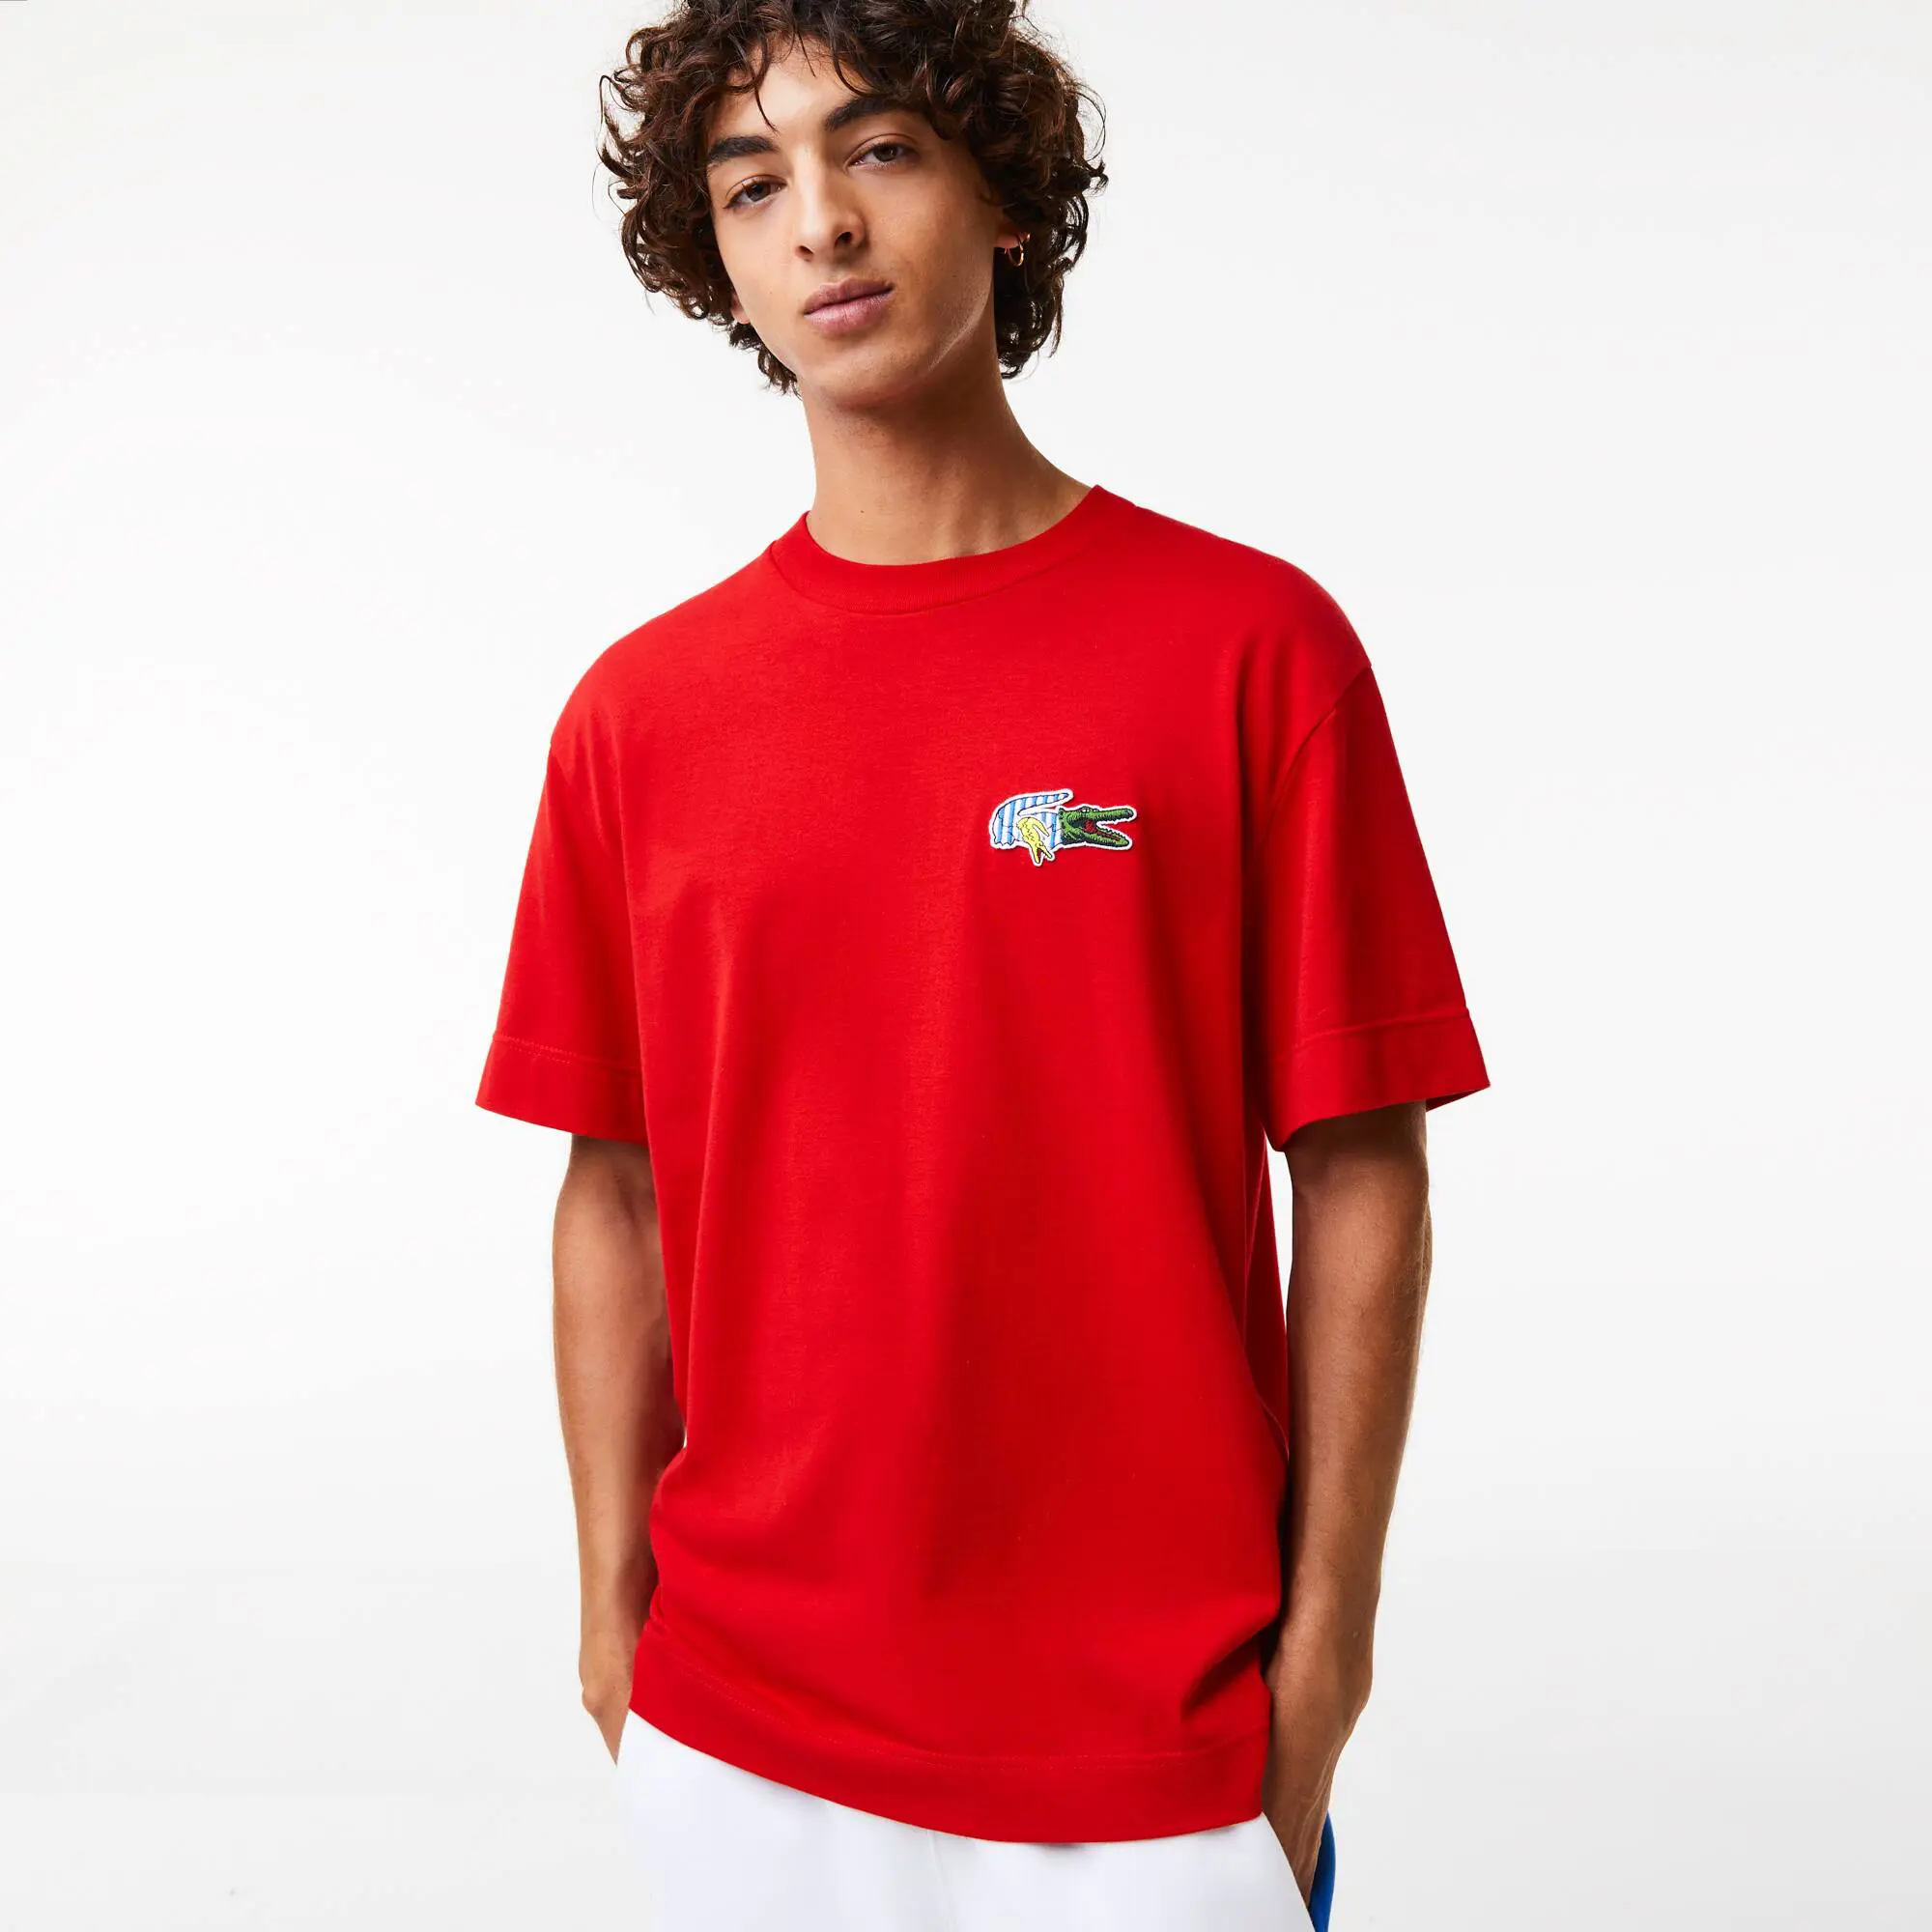 Lacoste Men's Relaxed Fit Comic Effect Badge T-Shirt. 1